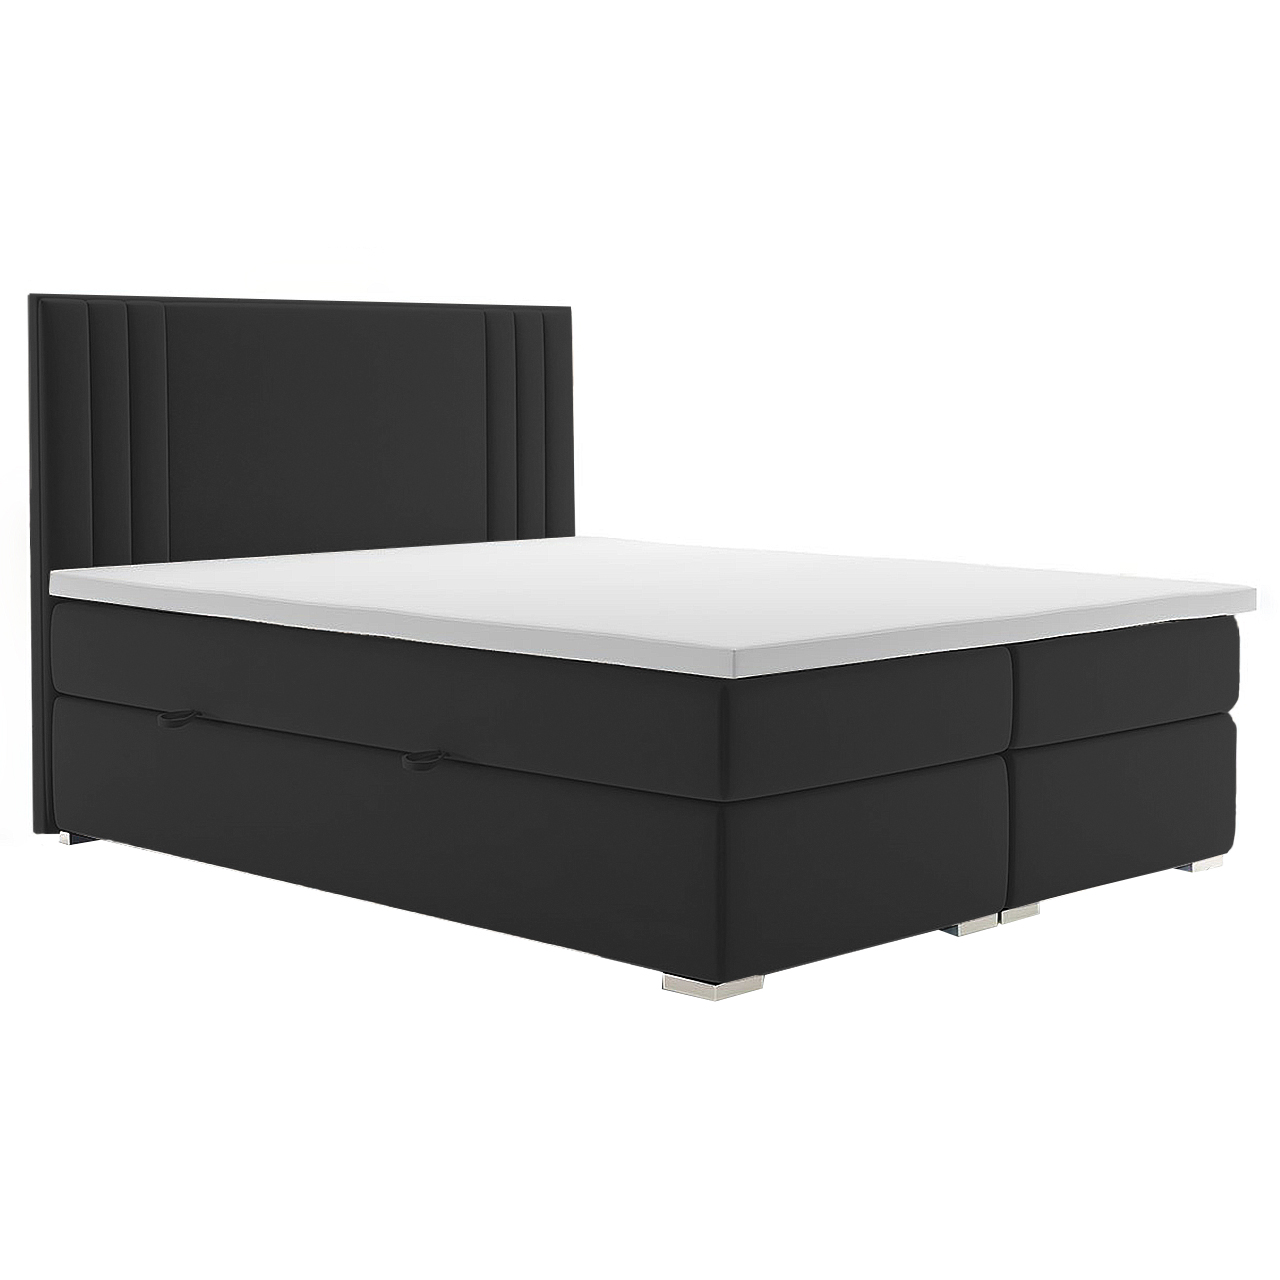 Upholstered bed MURAN 180x200 riviera 100